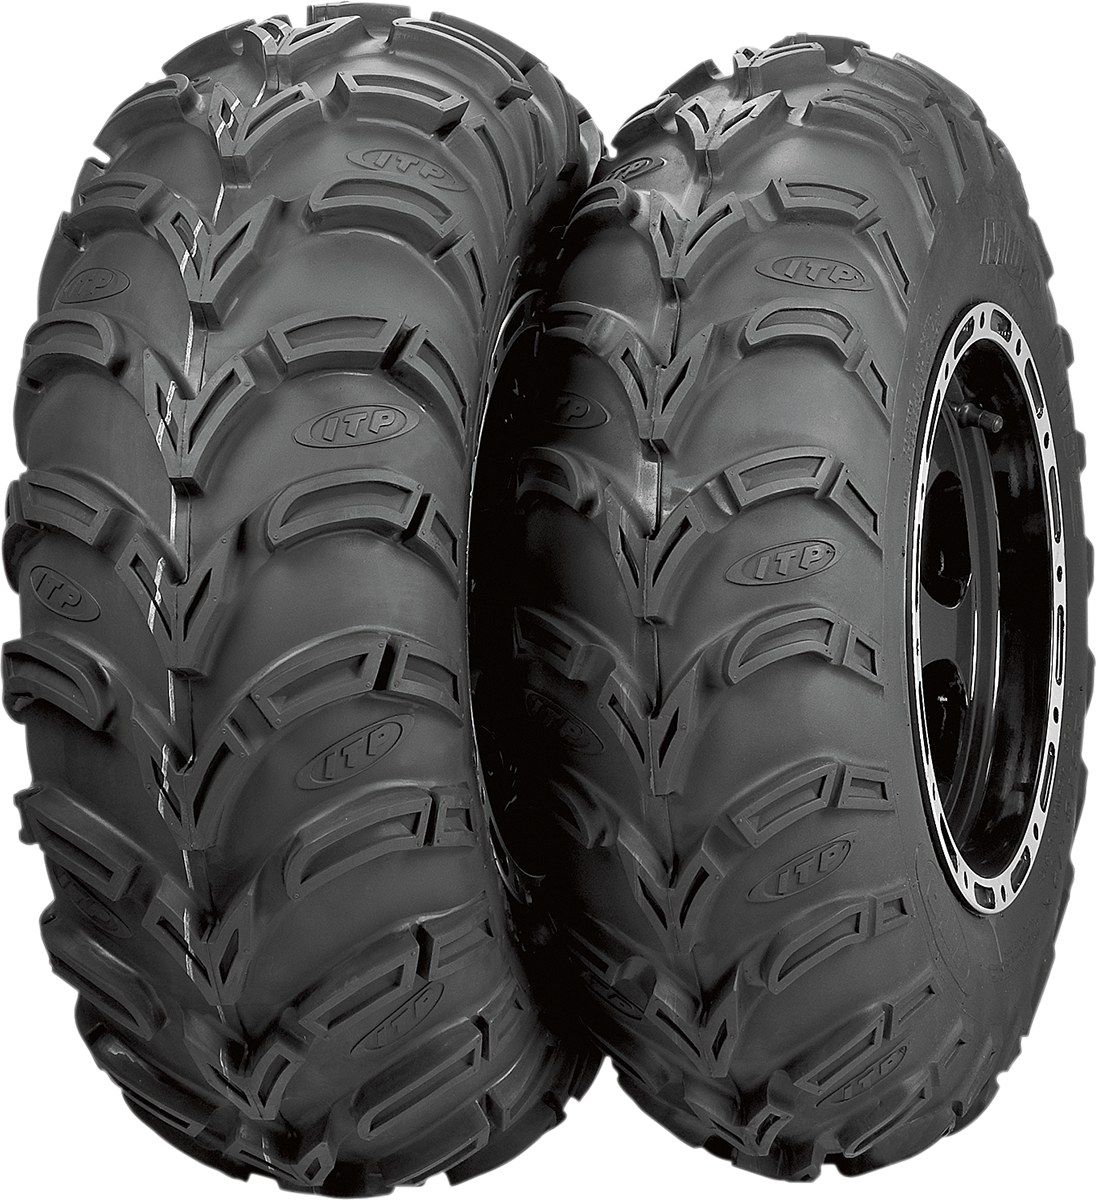 ITP Tire - Mud Lite XL - Front/Rear - 25x12-12 - 6 ply 560432